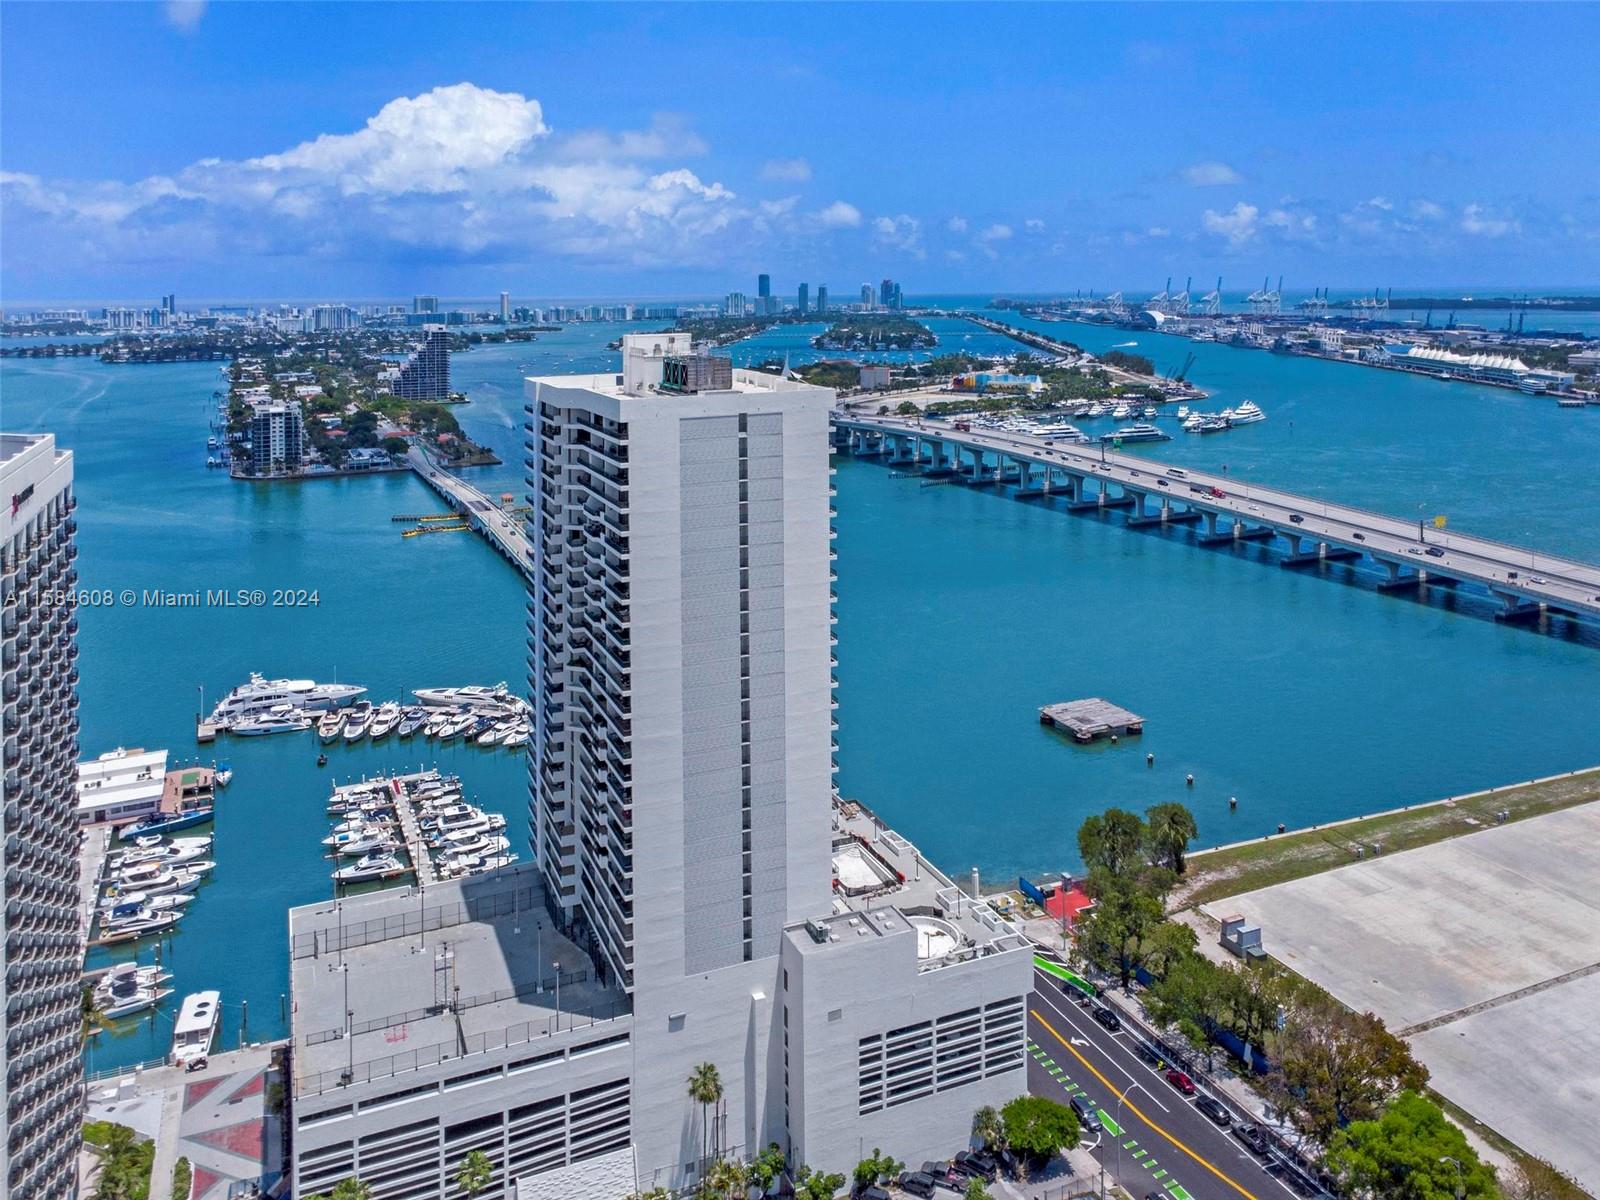 Very rarely available 2 bed / 2 bath at the Venetia Condo in red hot Edgewater featuring endless unobstructed views of Biscayne Bay, Miami Beach, and the Venetian Causeway from the living areas and massive wrap around balcony. Spacious and bright corner unit ready for the Buyer to renovate and make their own. Full amenity building with 24 hour security, bay side pool, fitness center, on site restaurant, valet parking, marina, and more. Located in the most opportune area of Miami only 5 minutes from Miami Beach, Wynwood, Midtown and only 10 minutes from Brickell. Excellent restaurants and shopping are within walking distance making this the ideal location to live. As an added bonus, the sale includes 2 highly coveted garage parking spaces. This is the opportunity you have been looking for!